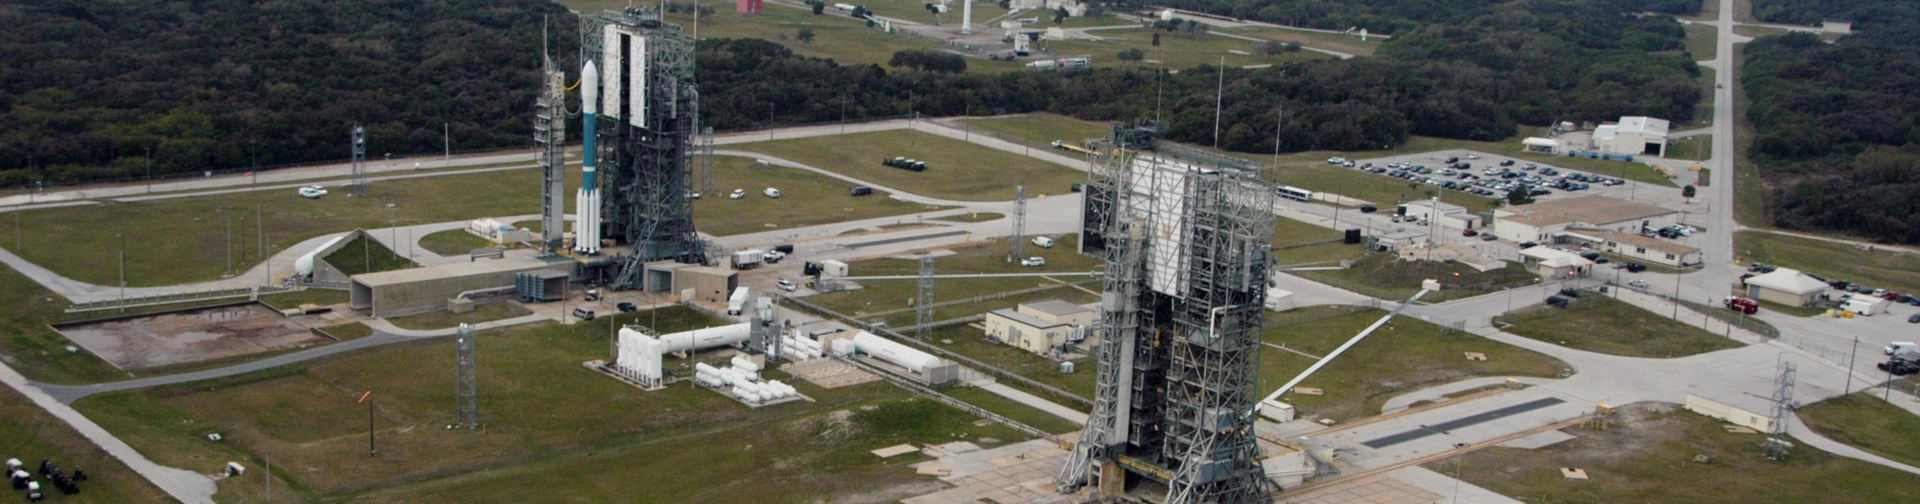 Cape Canaveral Space Force Station